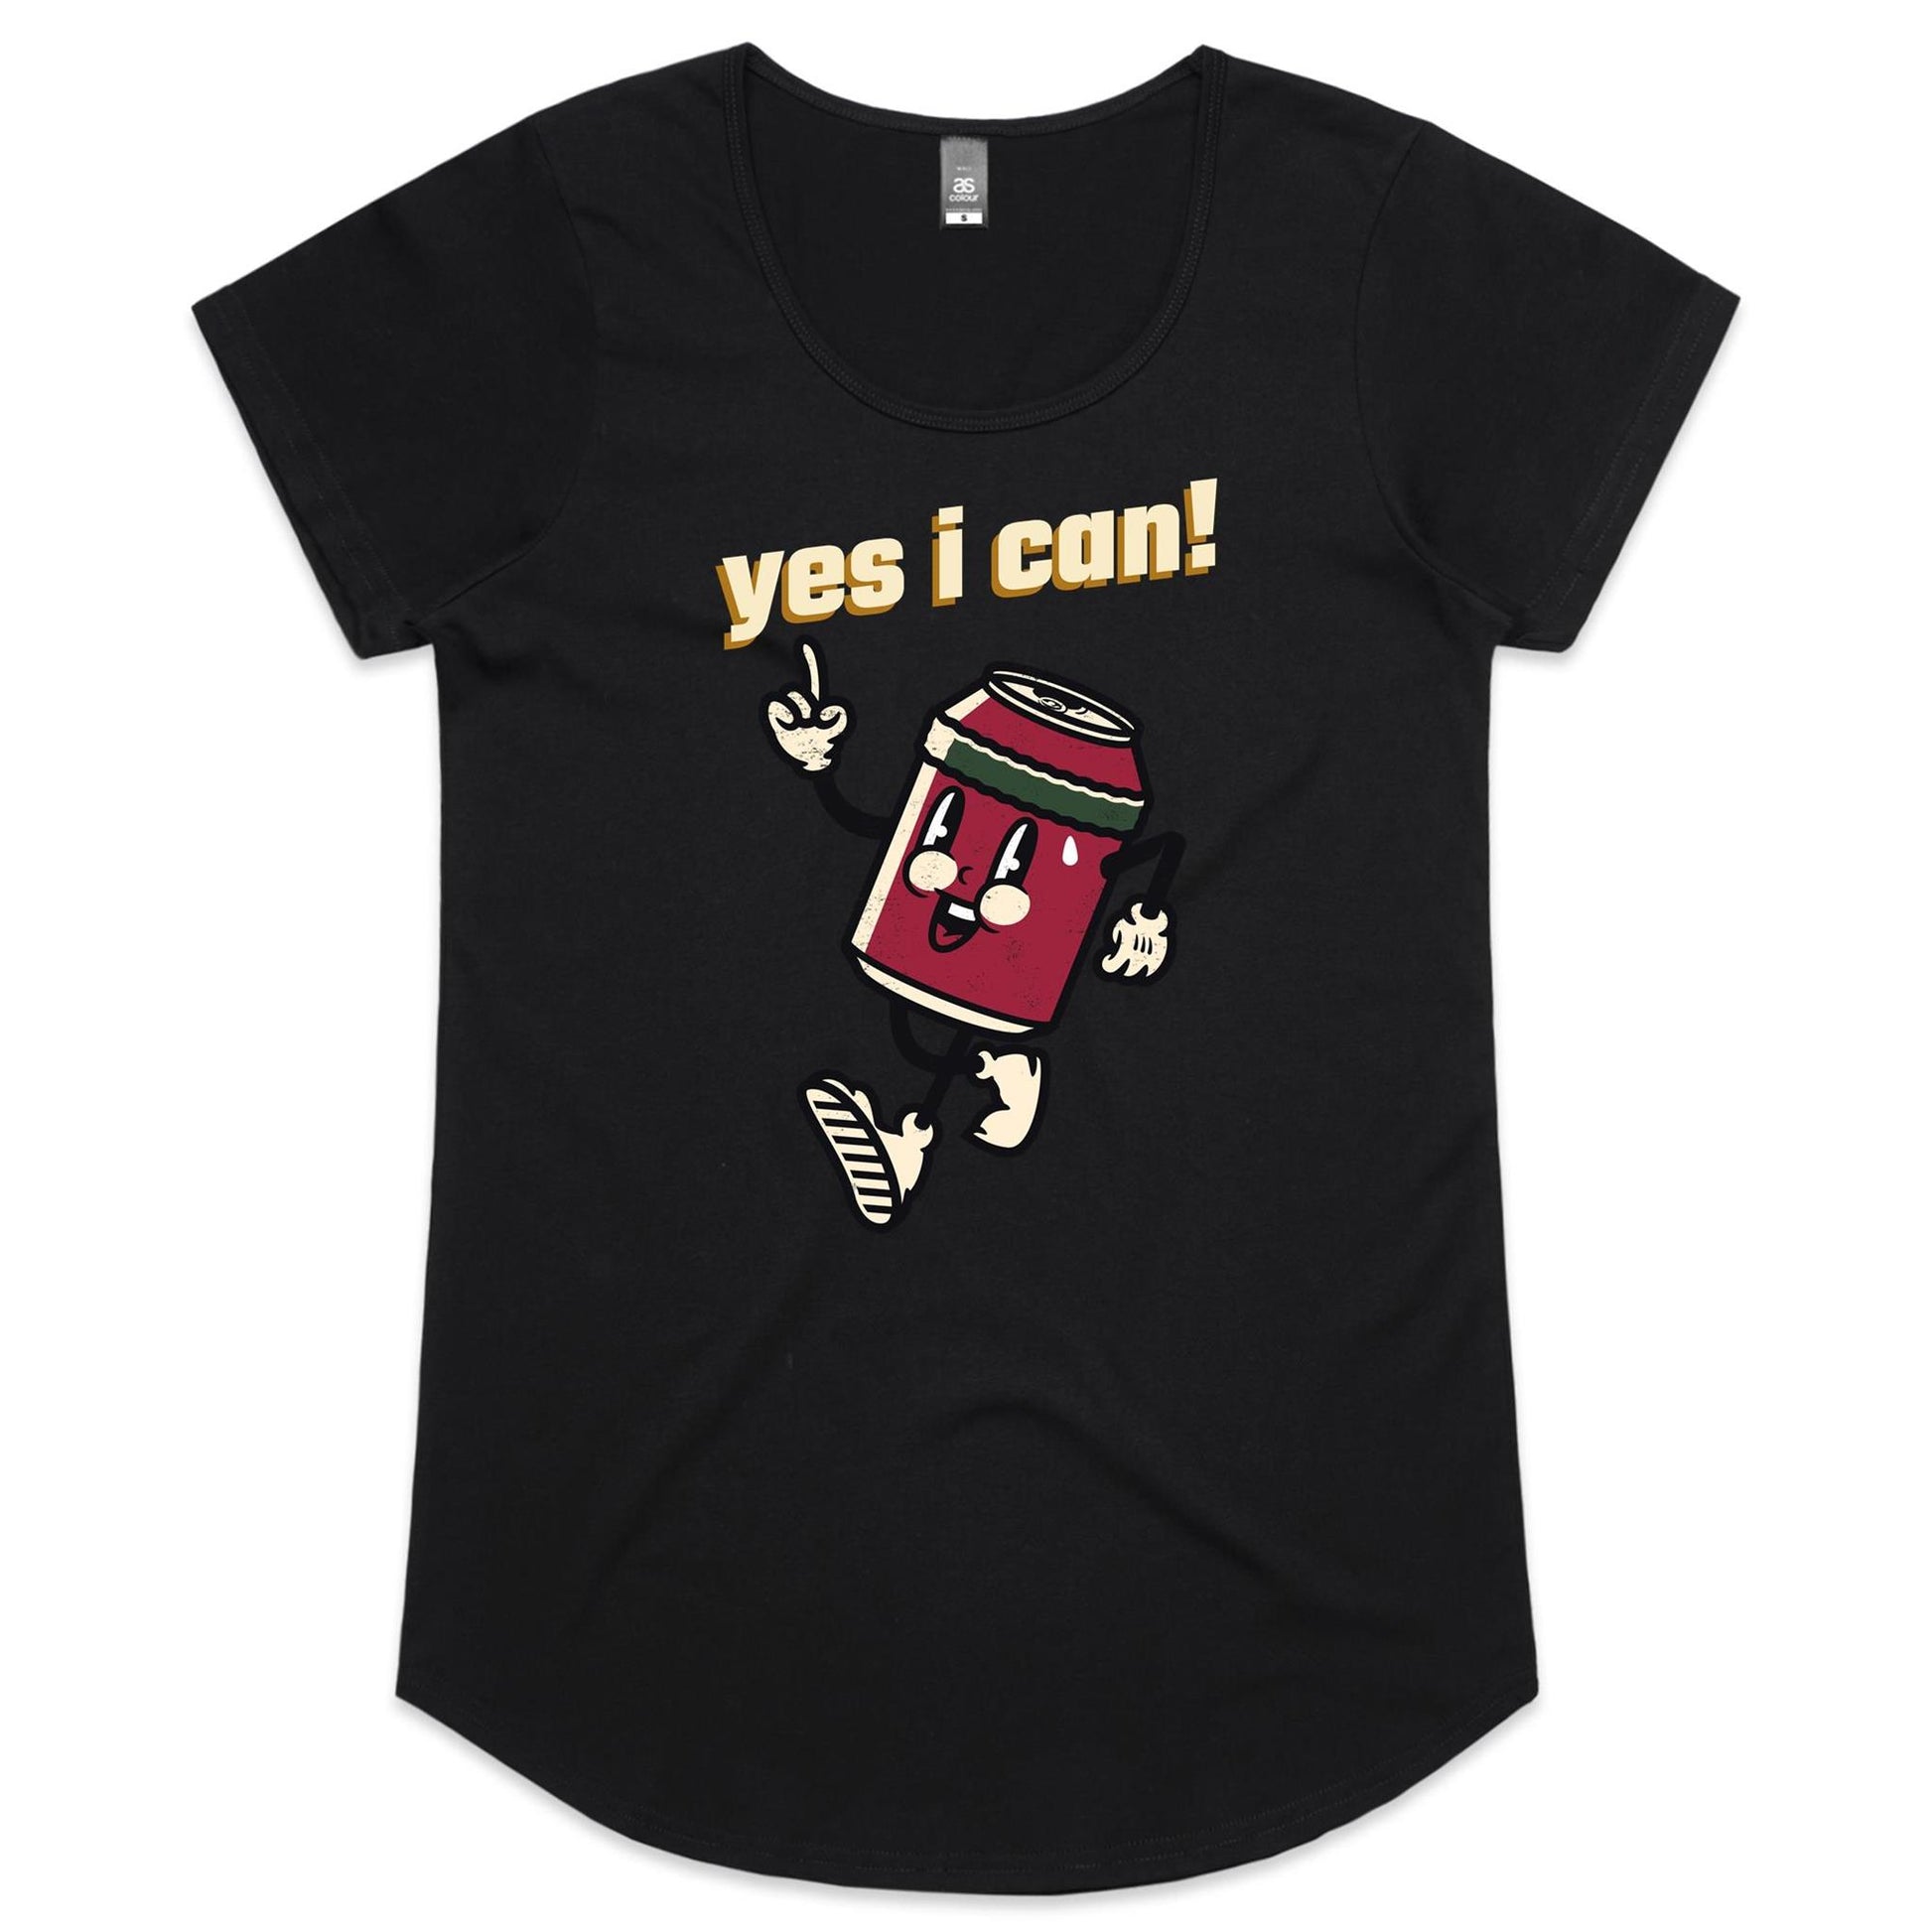 Yes I Can! - Womens Scoop Neck T-Shirt Black Womens Scoop Neck T-shirt Motivation Retro